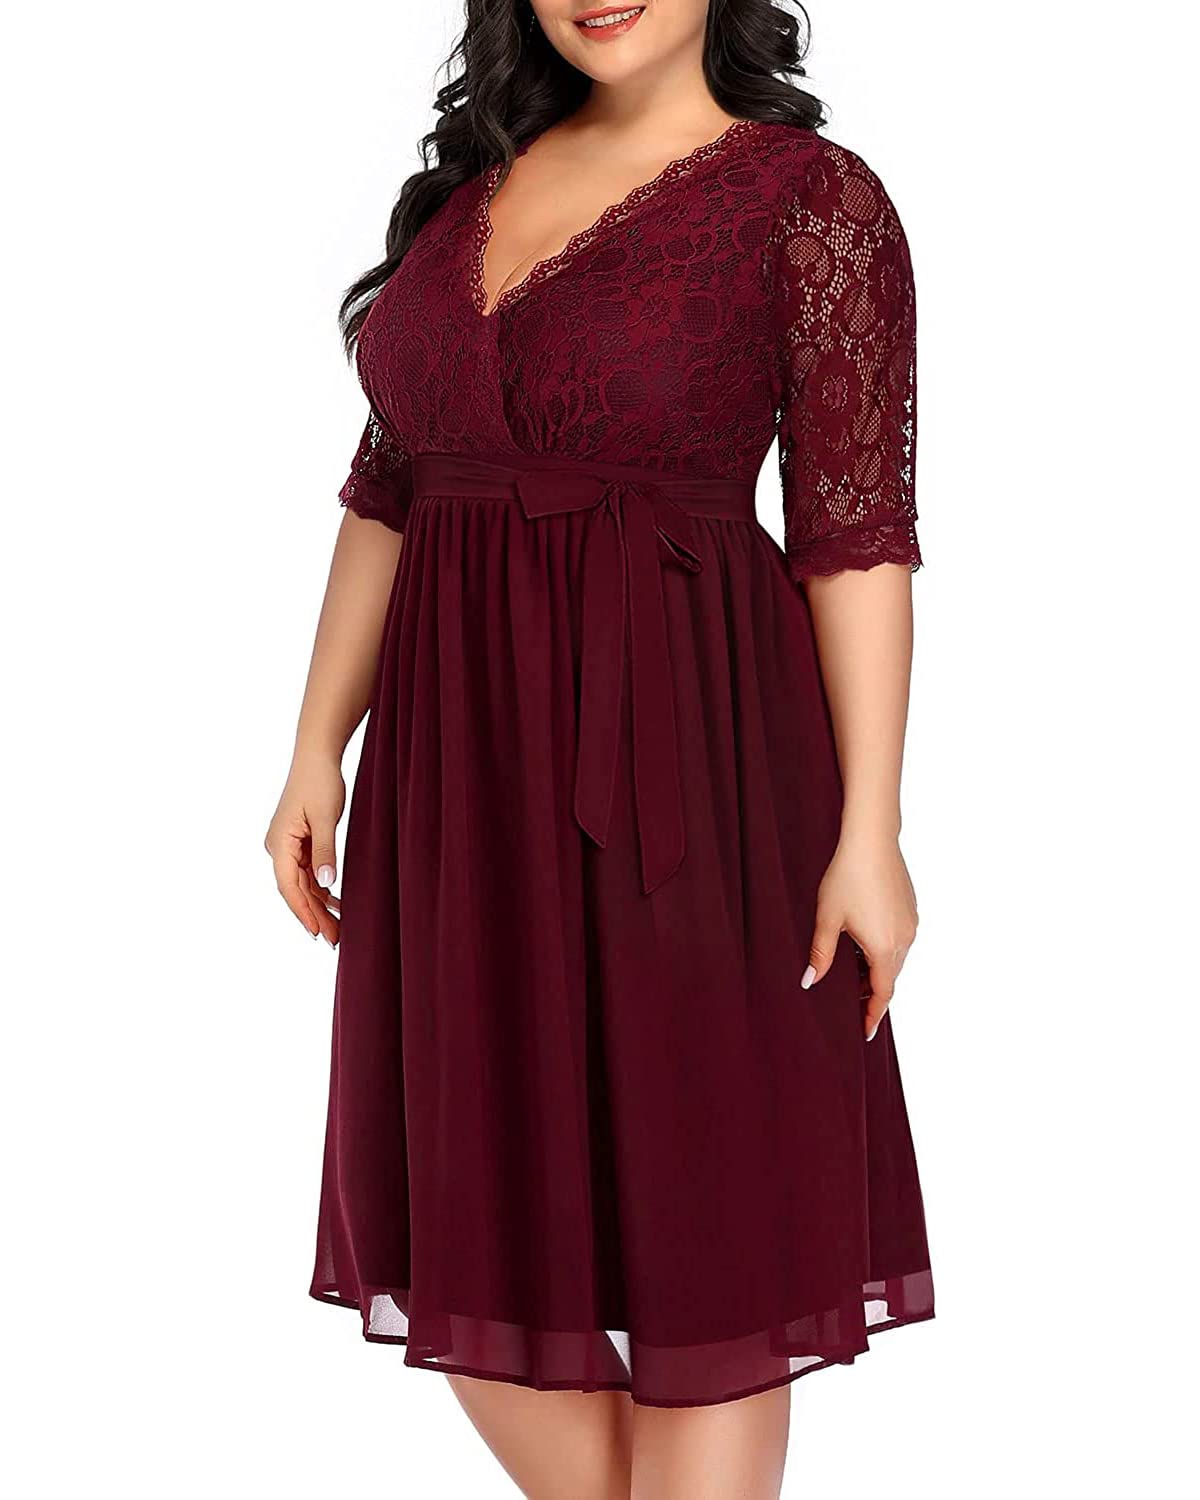 Pinup Fashion Plus Size Cocktail Dresses Women Burgundy Red Lace Top Chiffon Wedding Guest Semi-Formal Maroon Evening Party Wrap